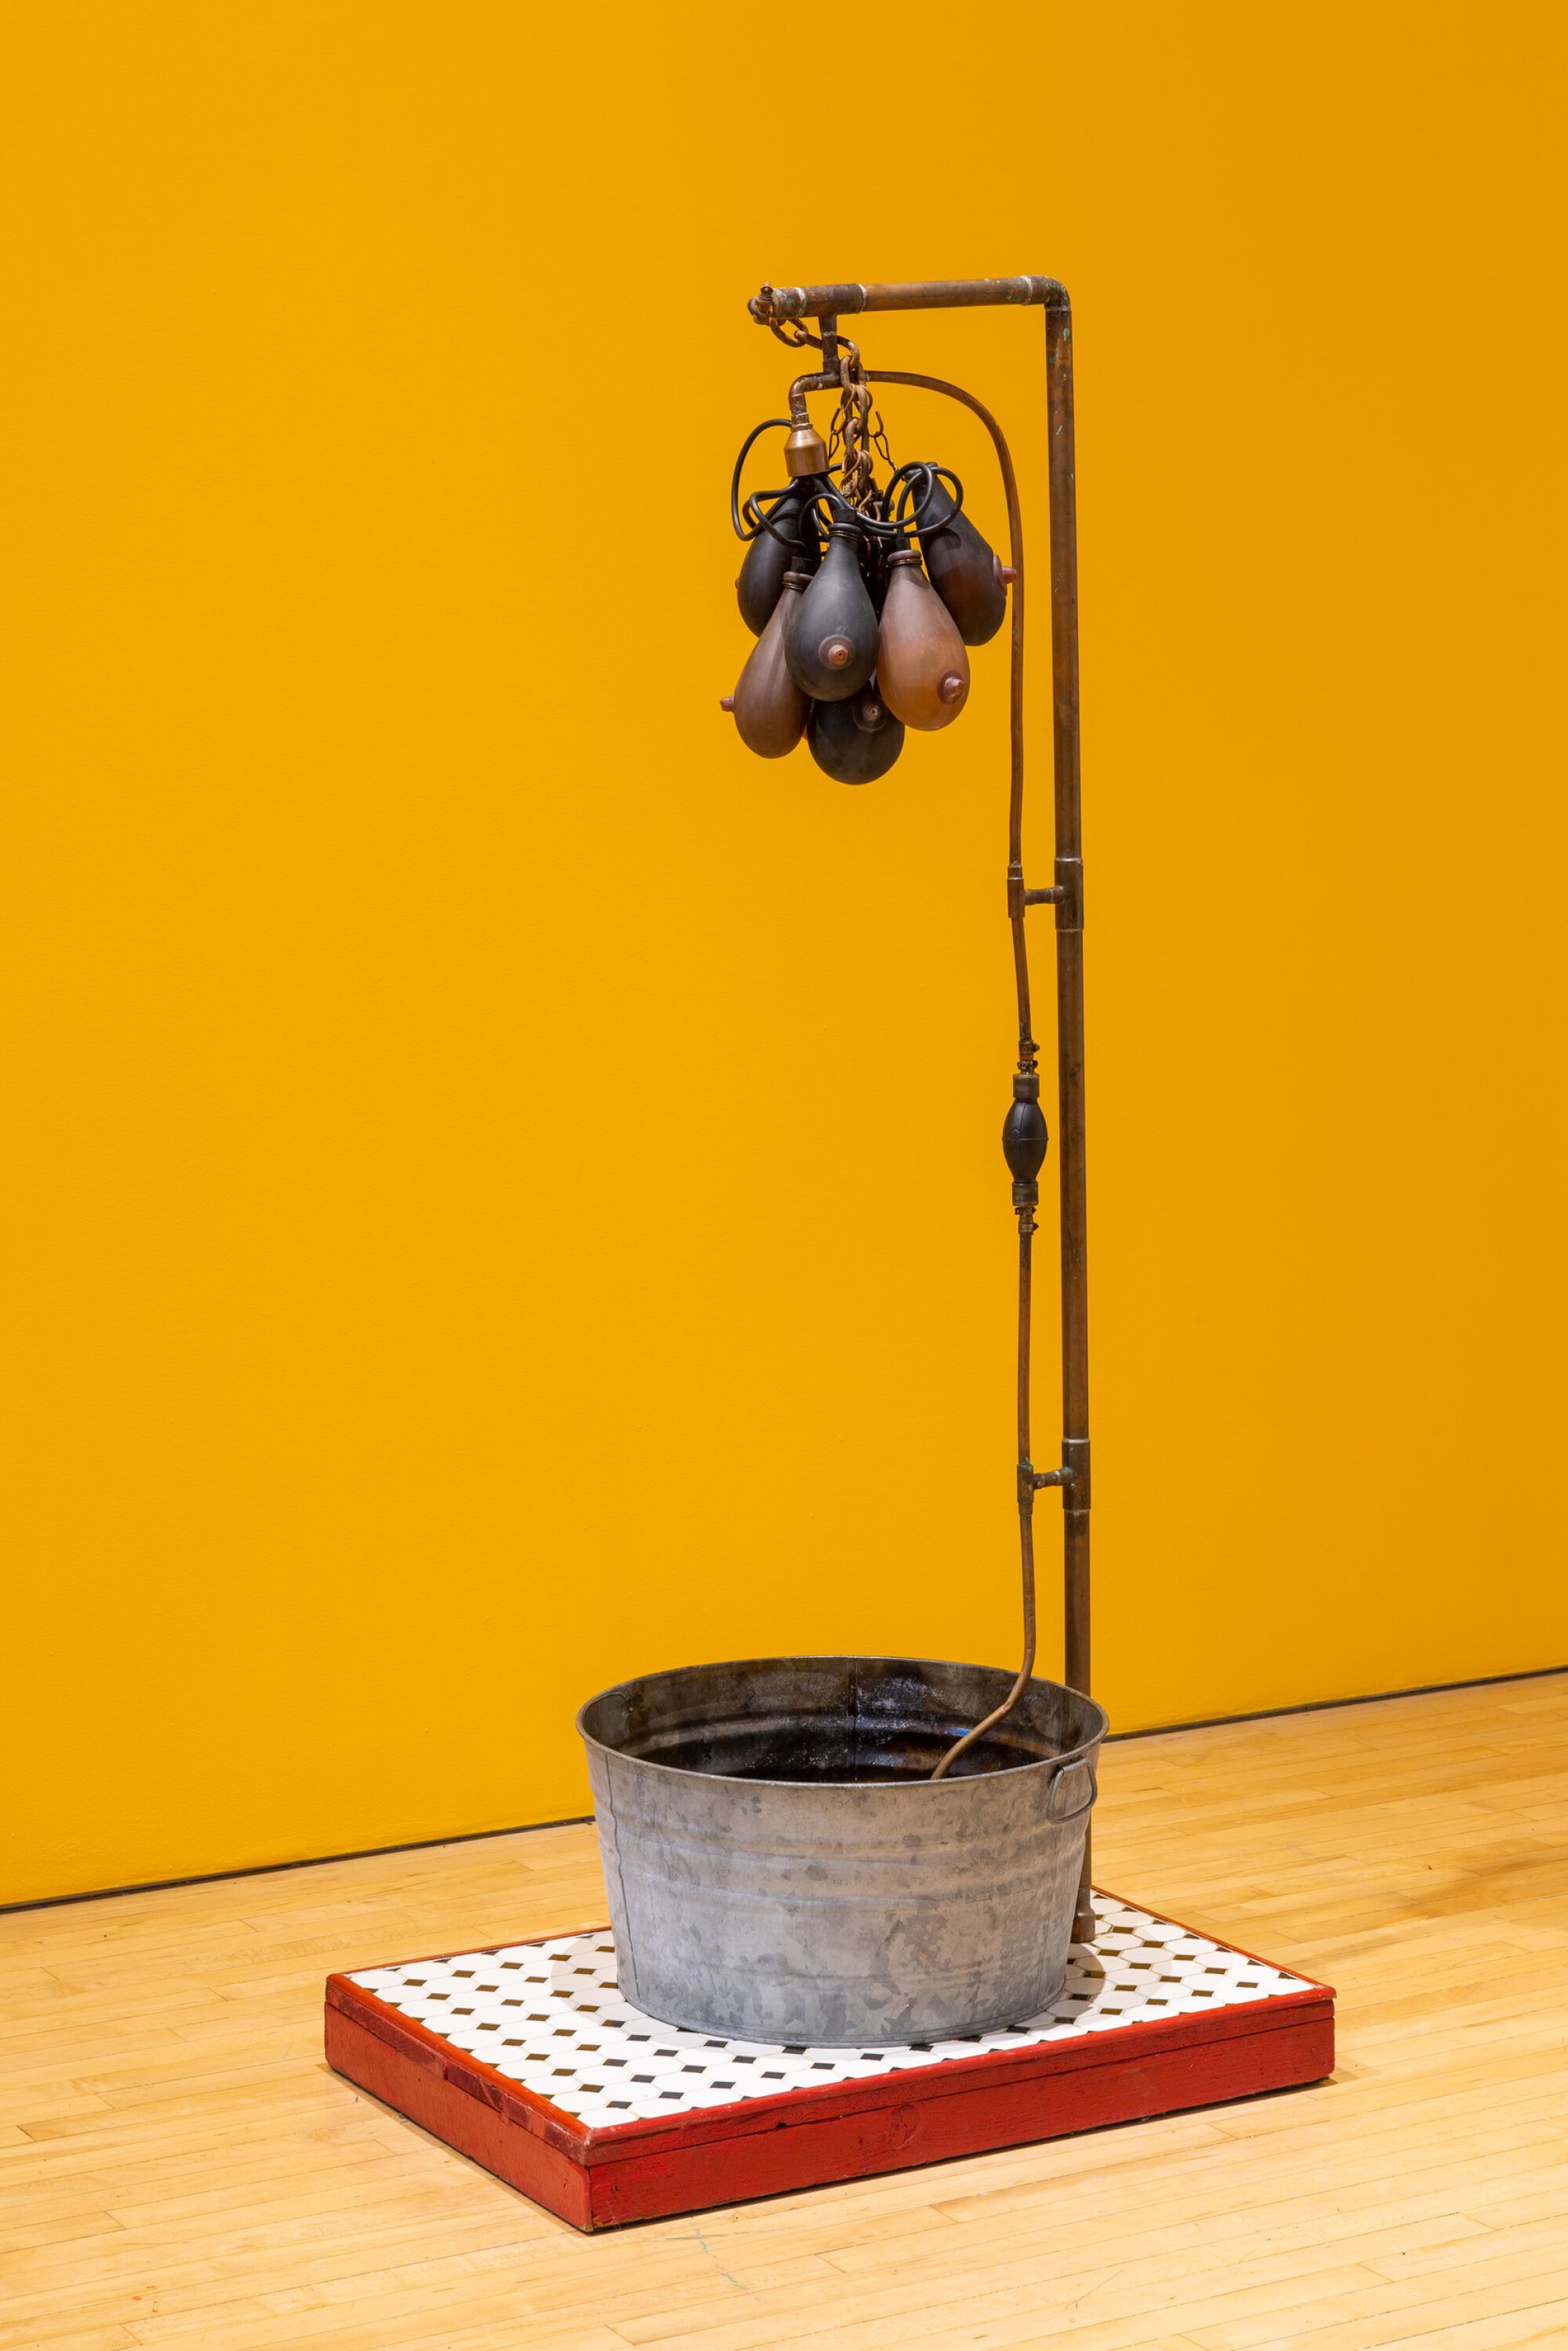 An assemblage sculpture features a clutch of breast-like forms made from glass suspended over a washtub